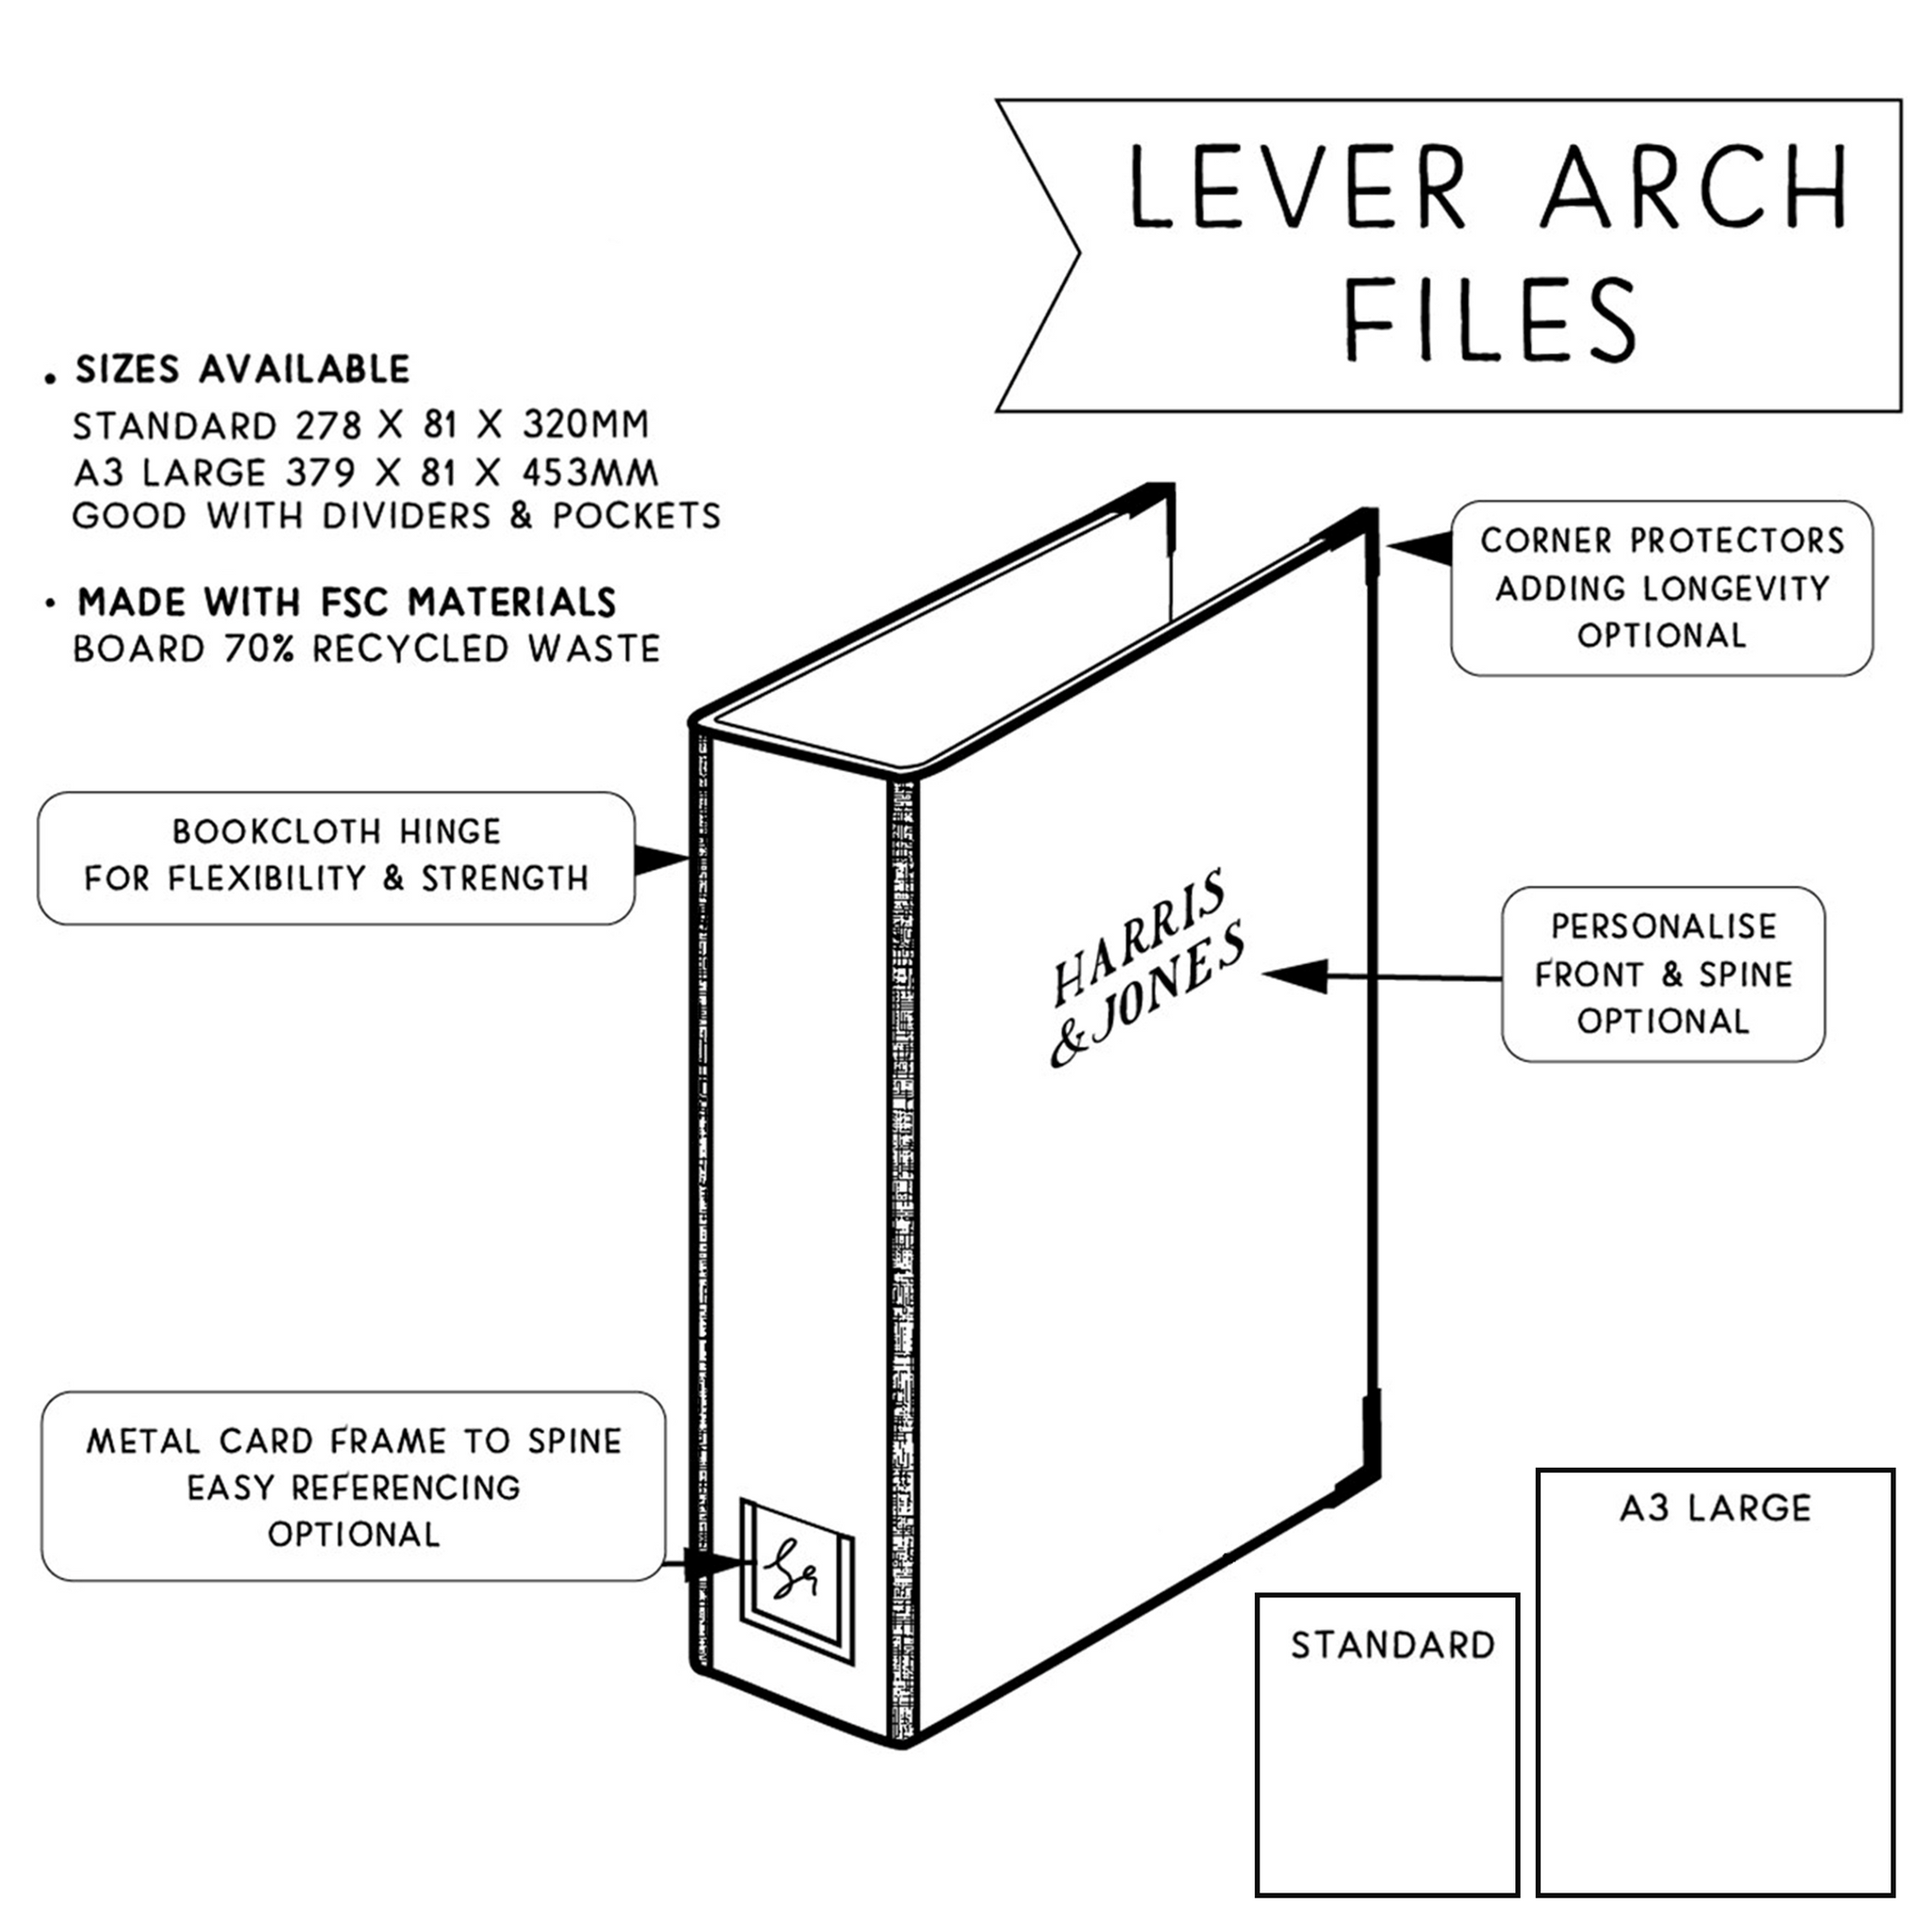 Classic Lever Arch Files